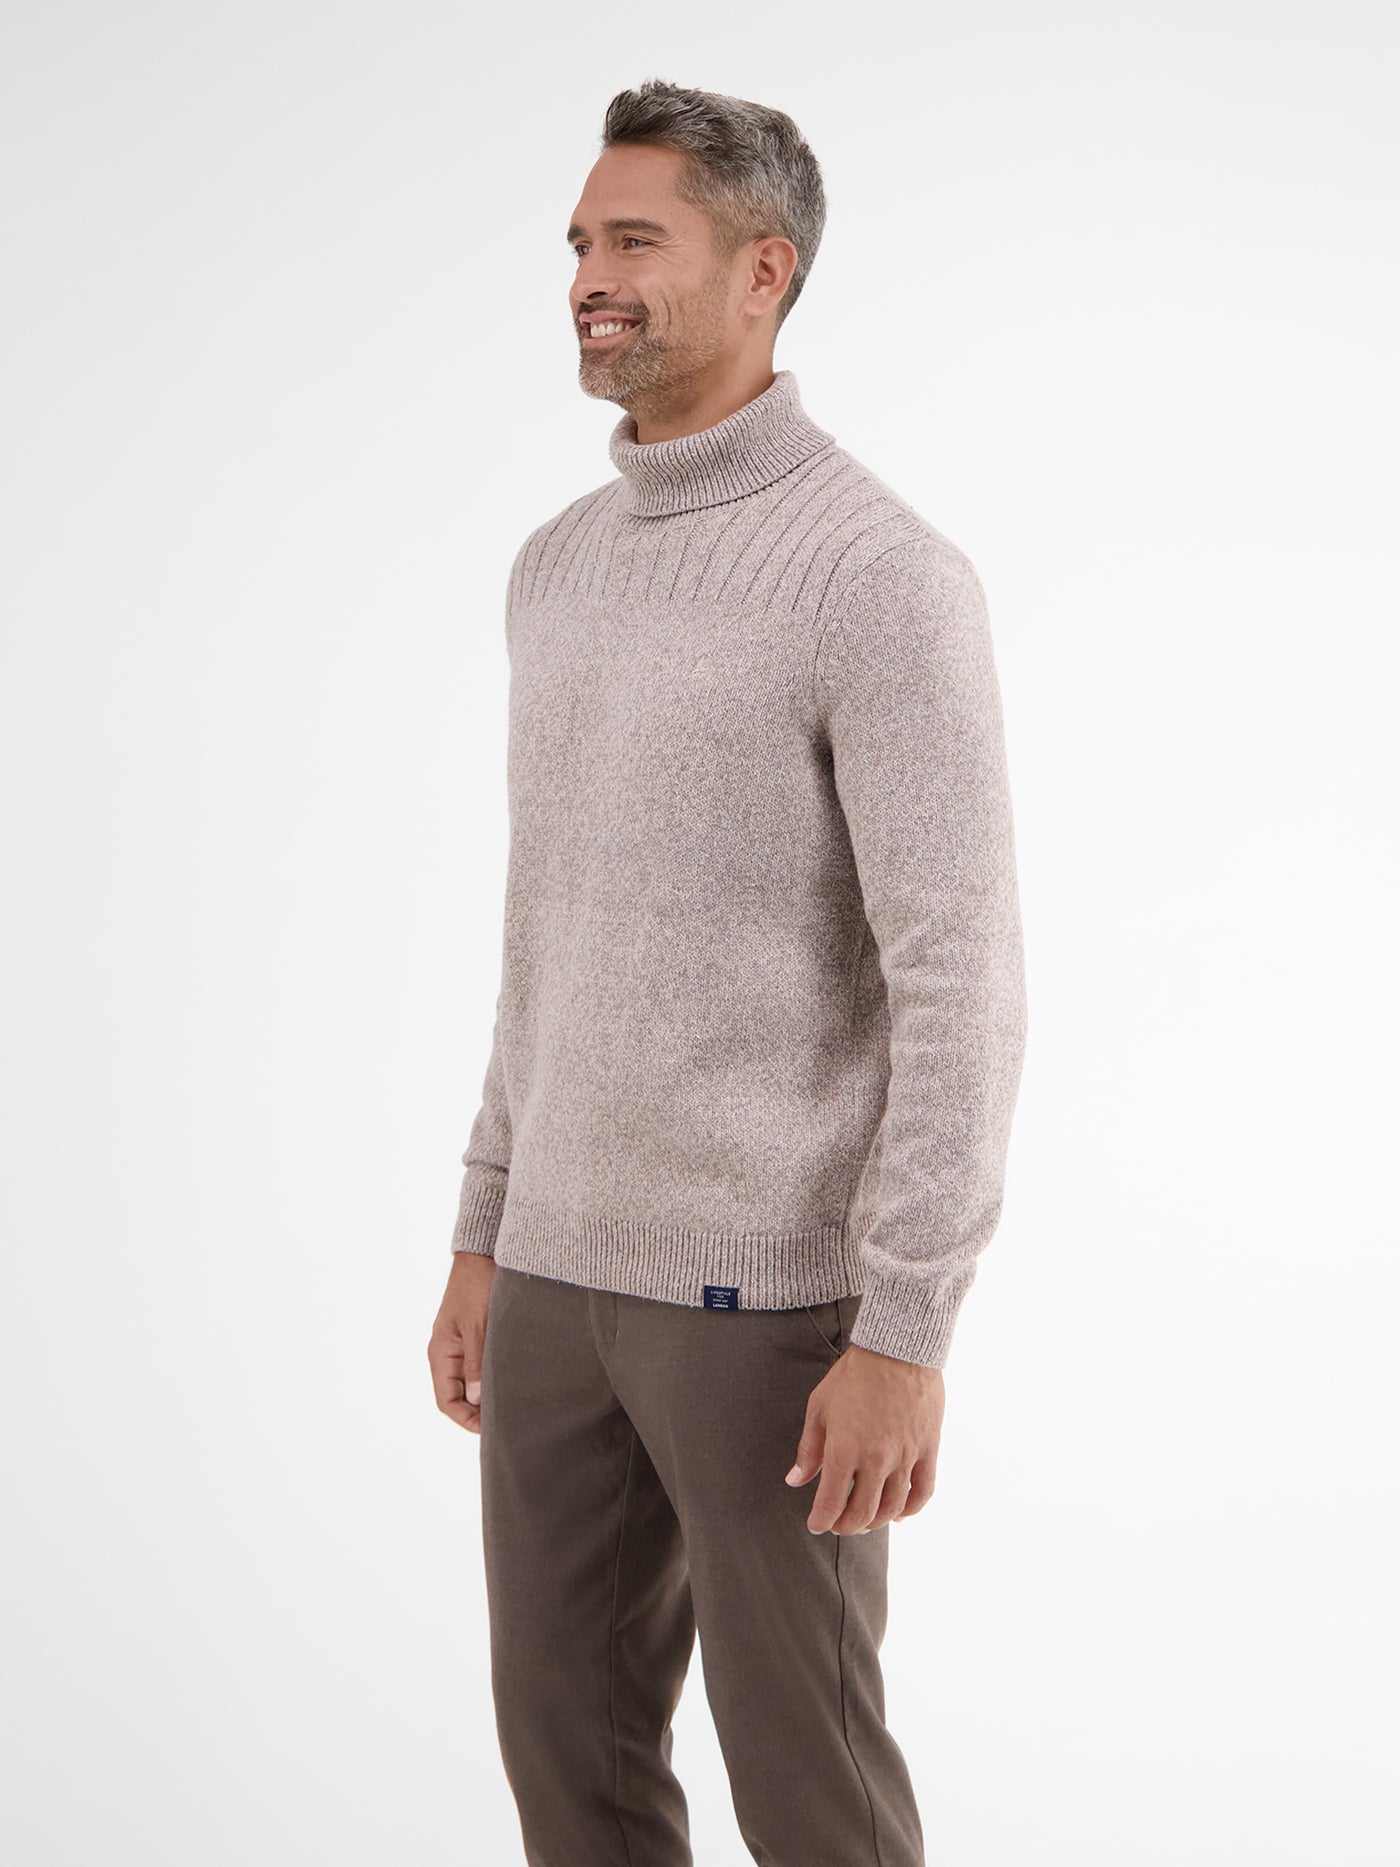 Turtleneck knit with a salt and pepper look